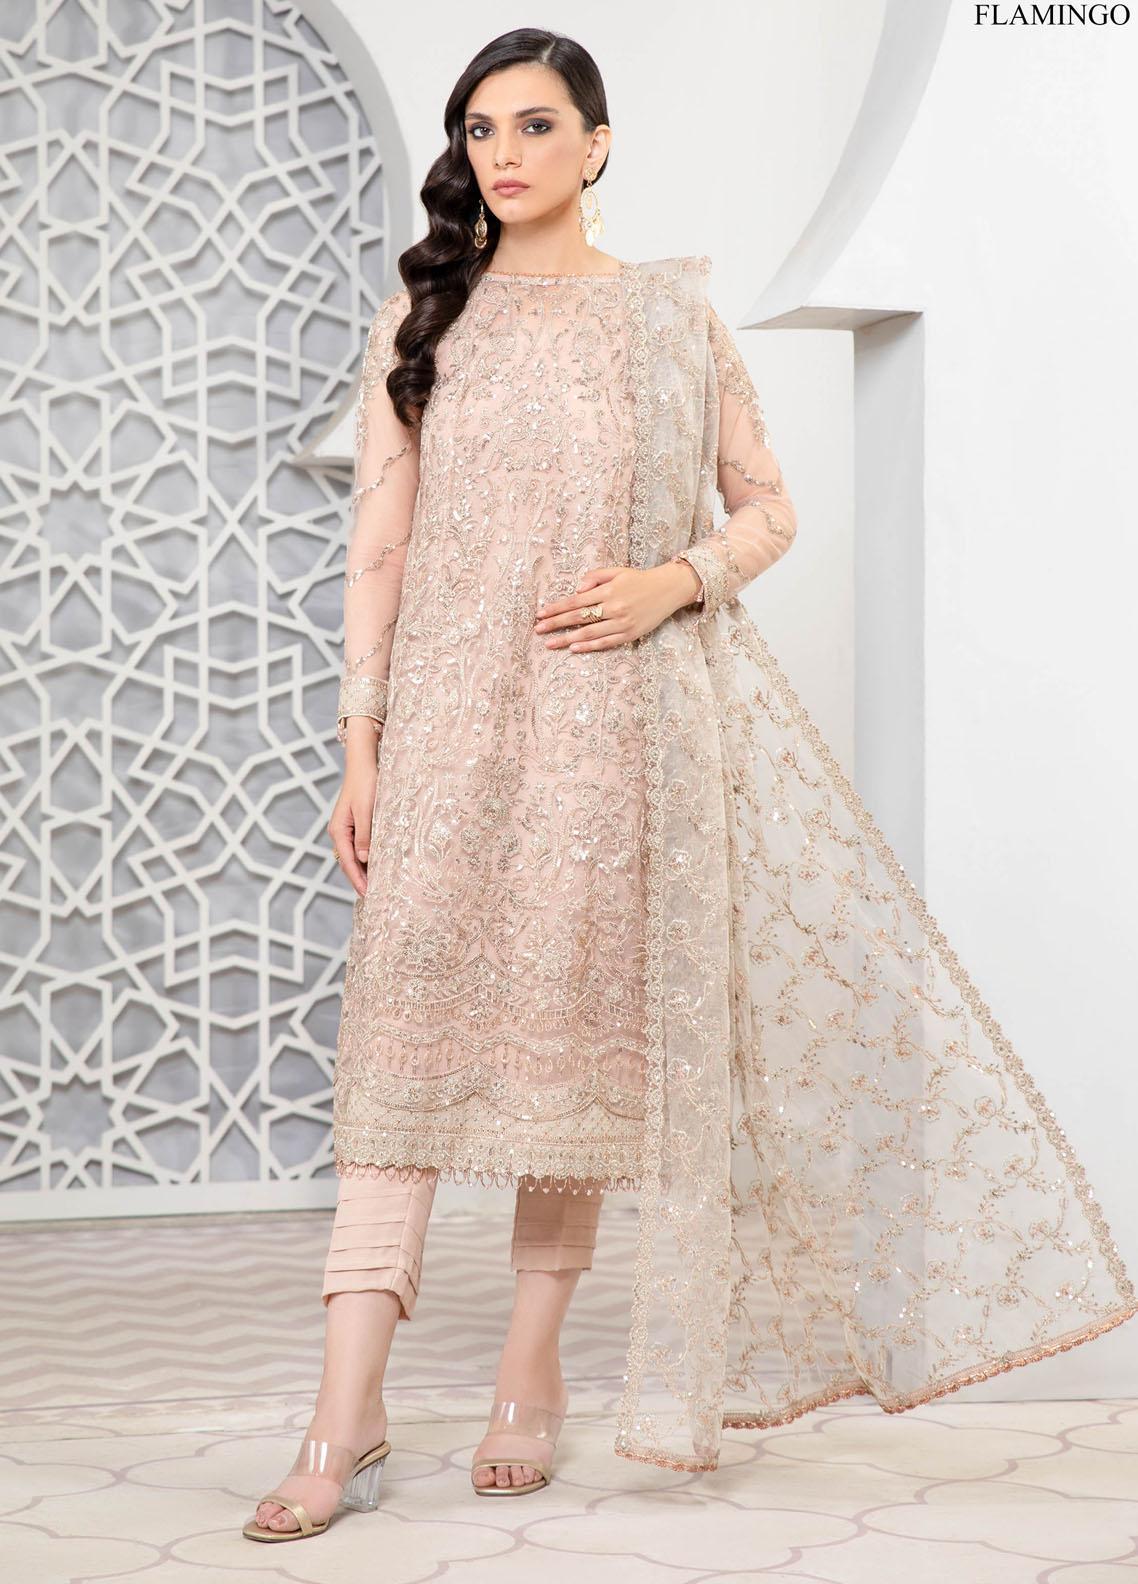 Pareesia by Zarif Embroidered Net Suit Unstitched 3 Piece ZPC22-09 Flamingo - Luxury Collection